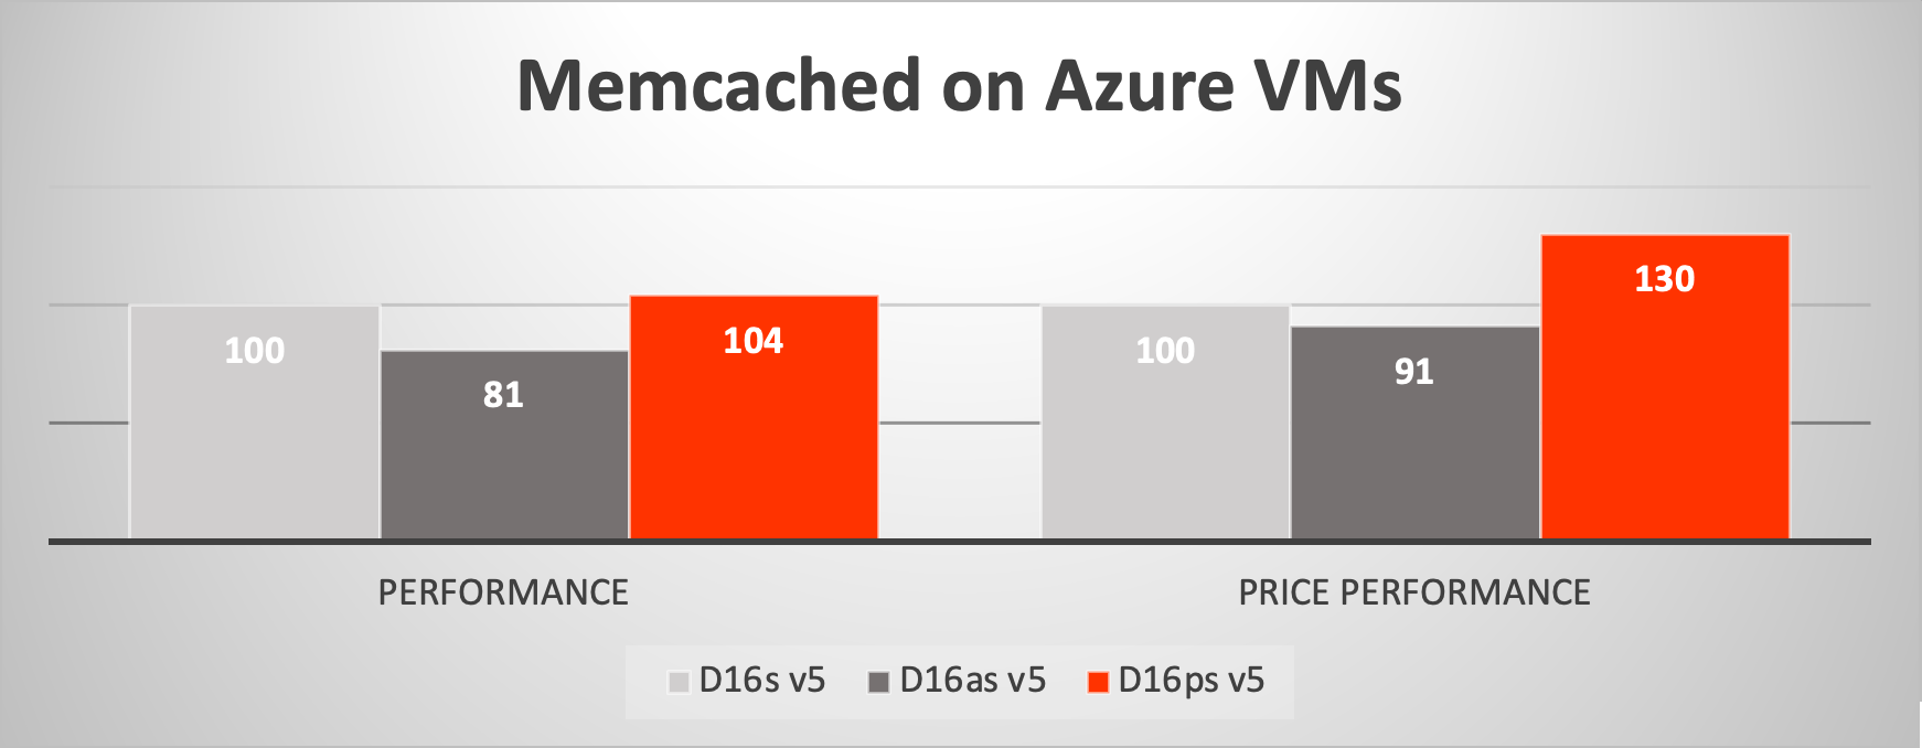 azure_memcached.png